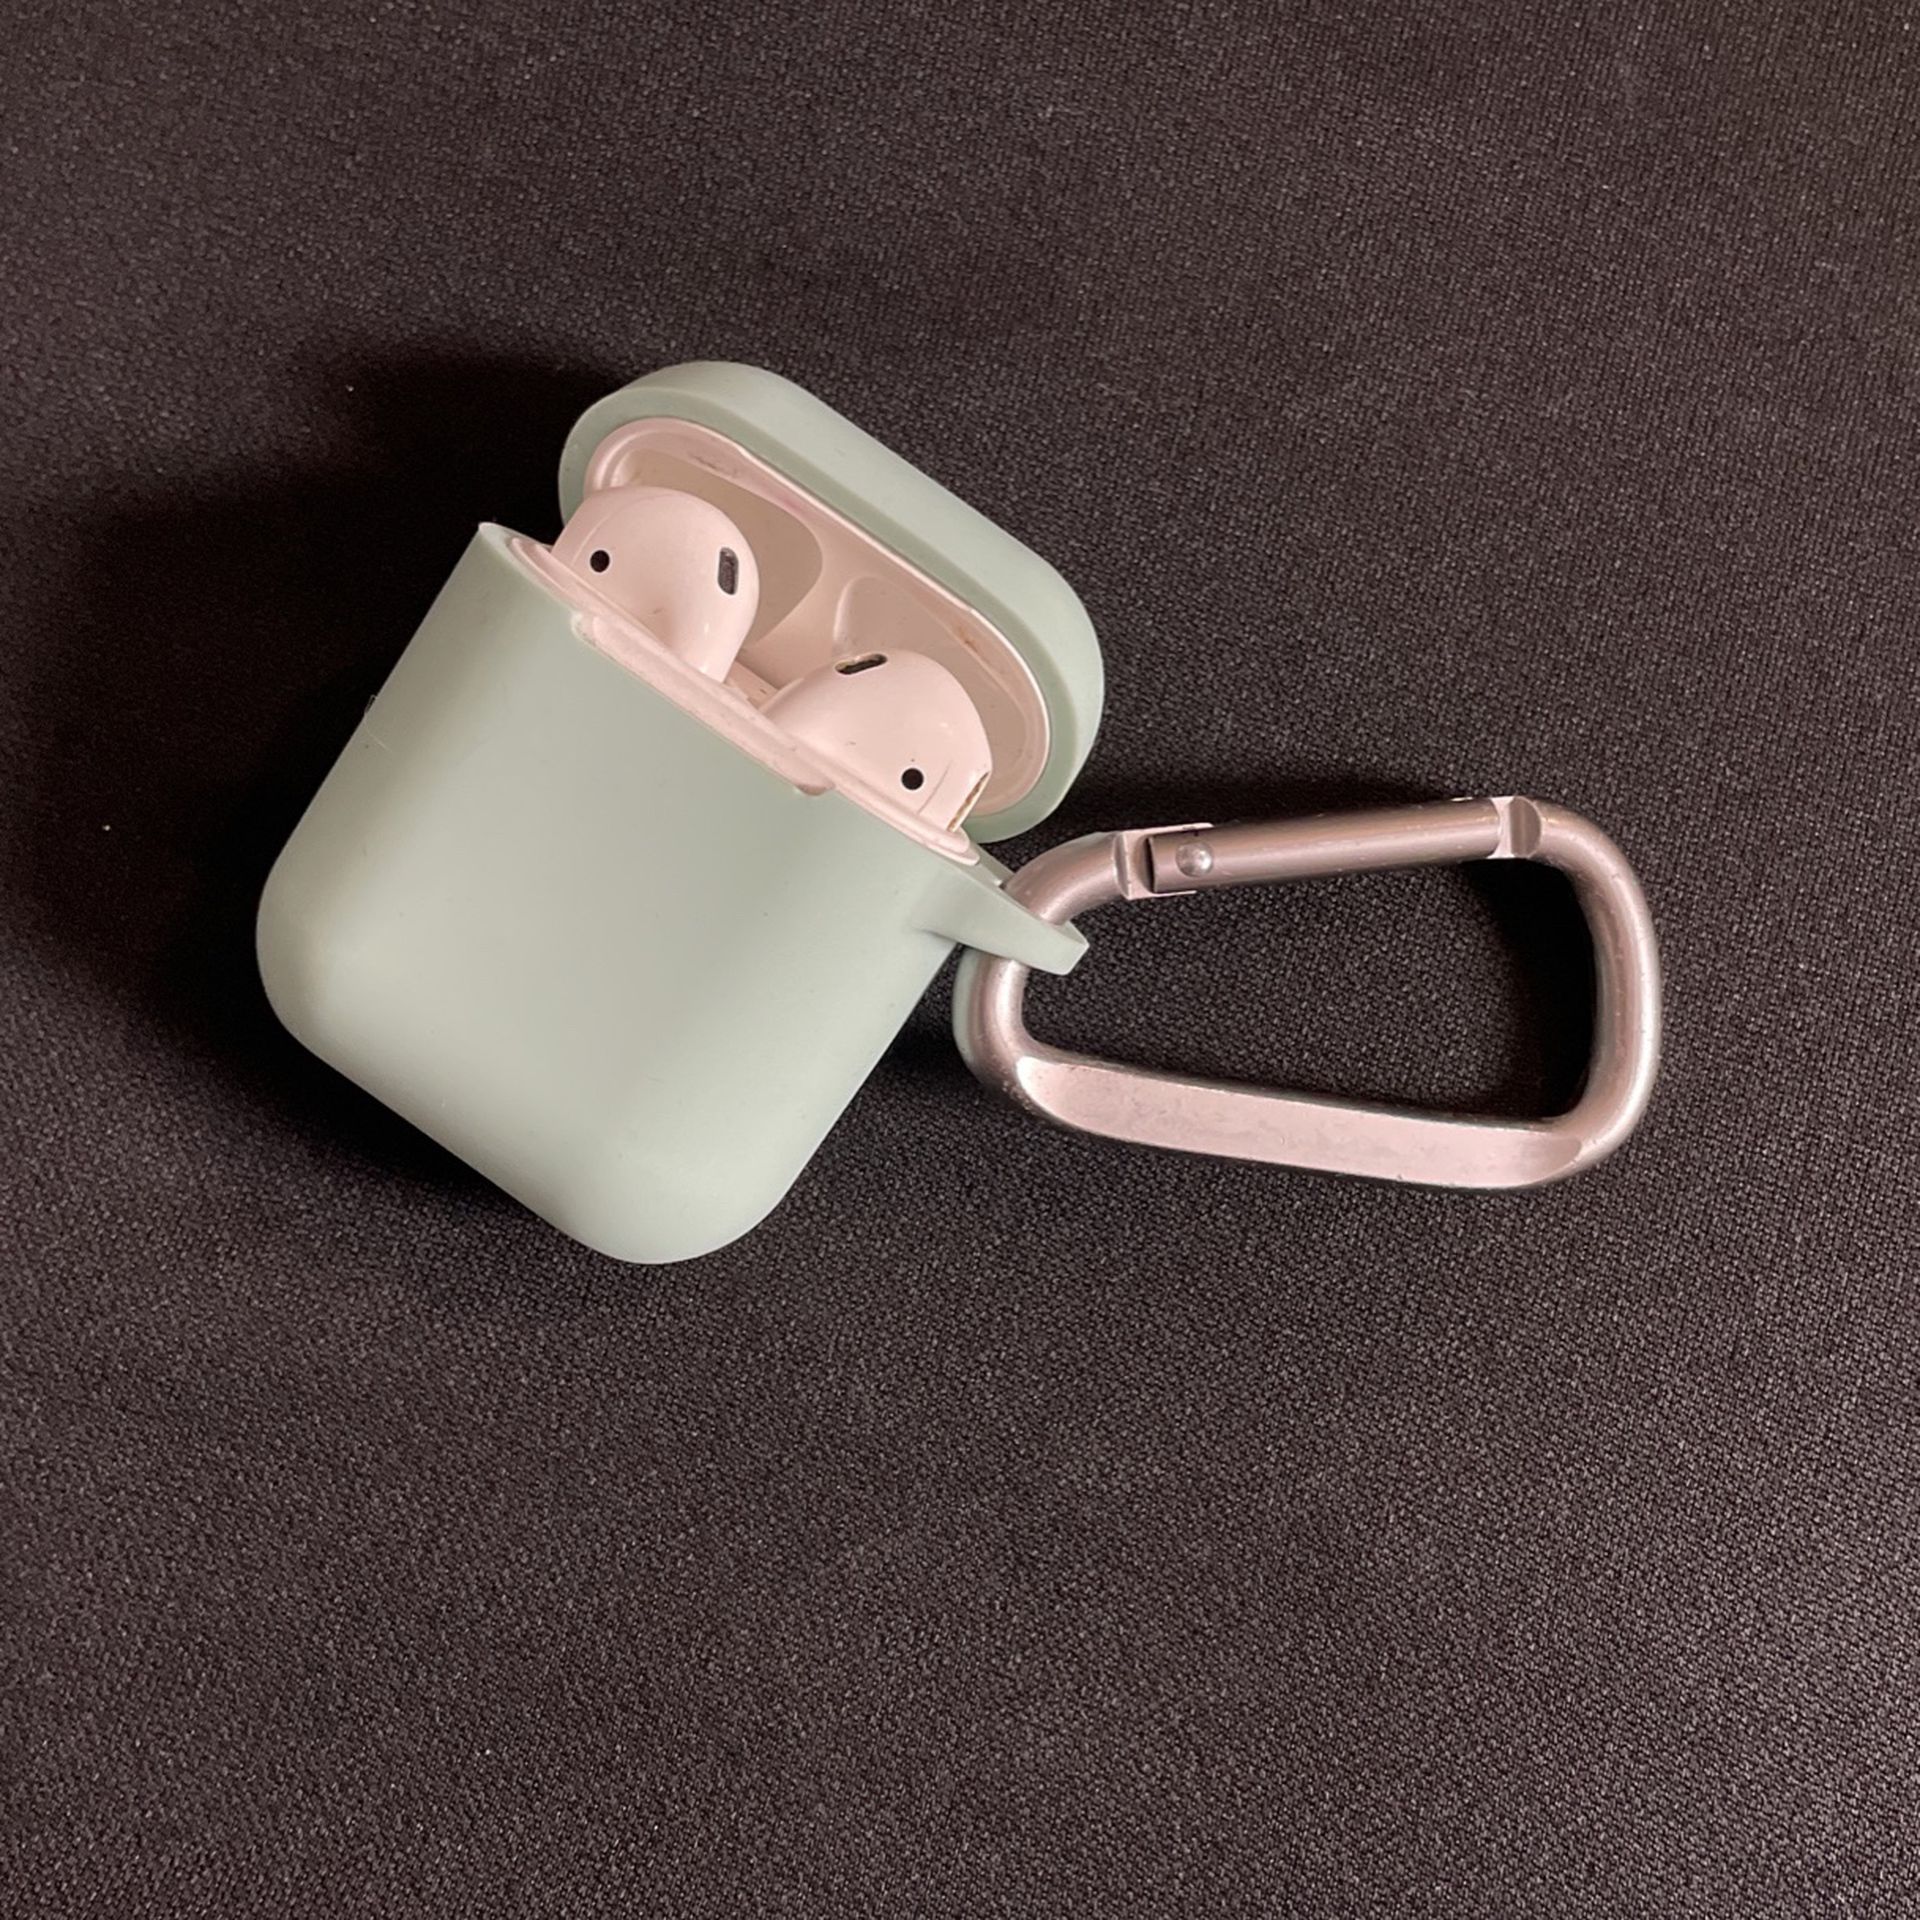 2nd gen AirPods with Case